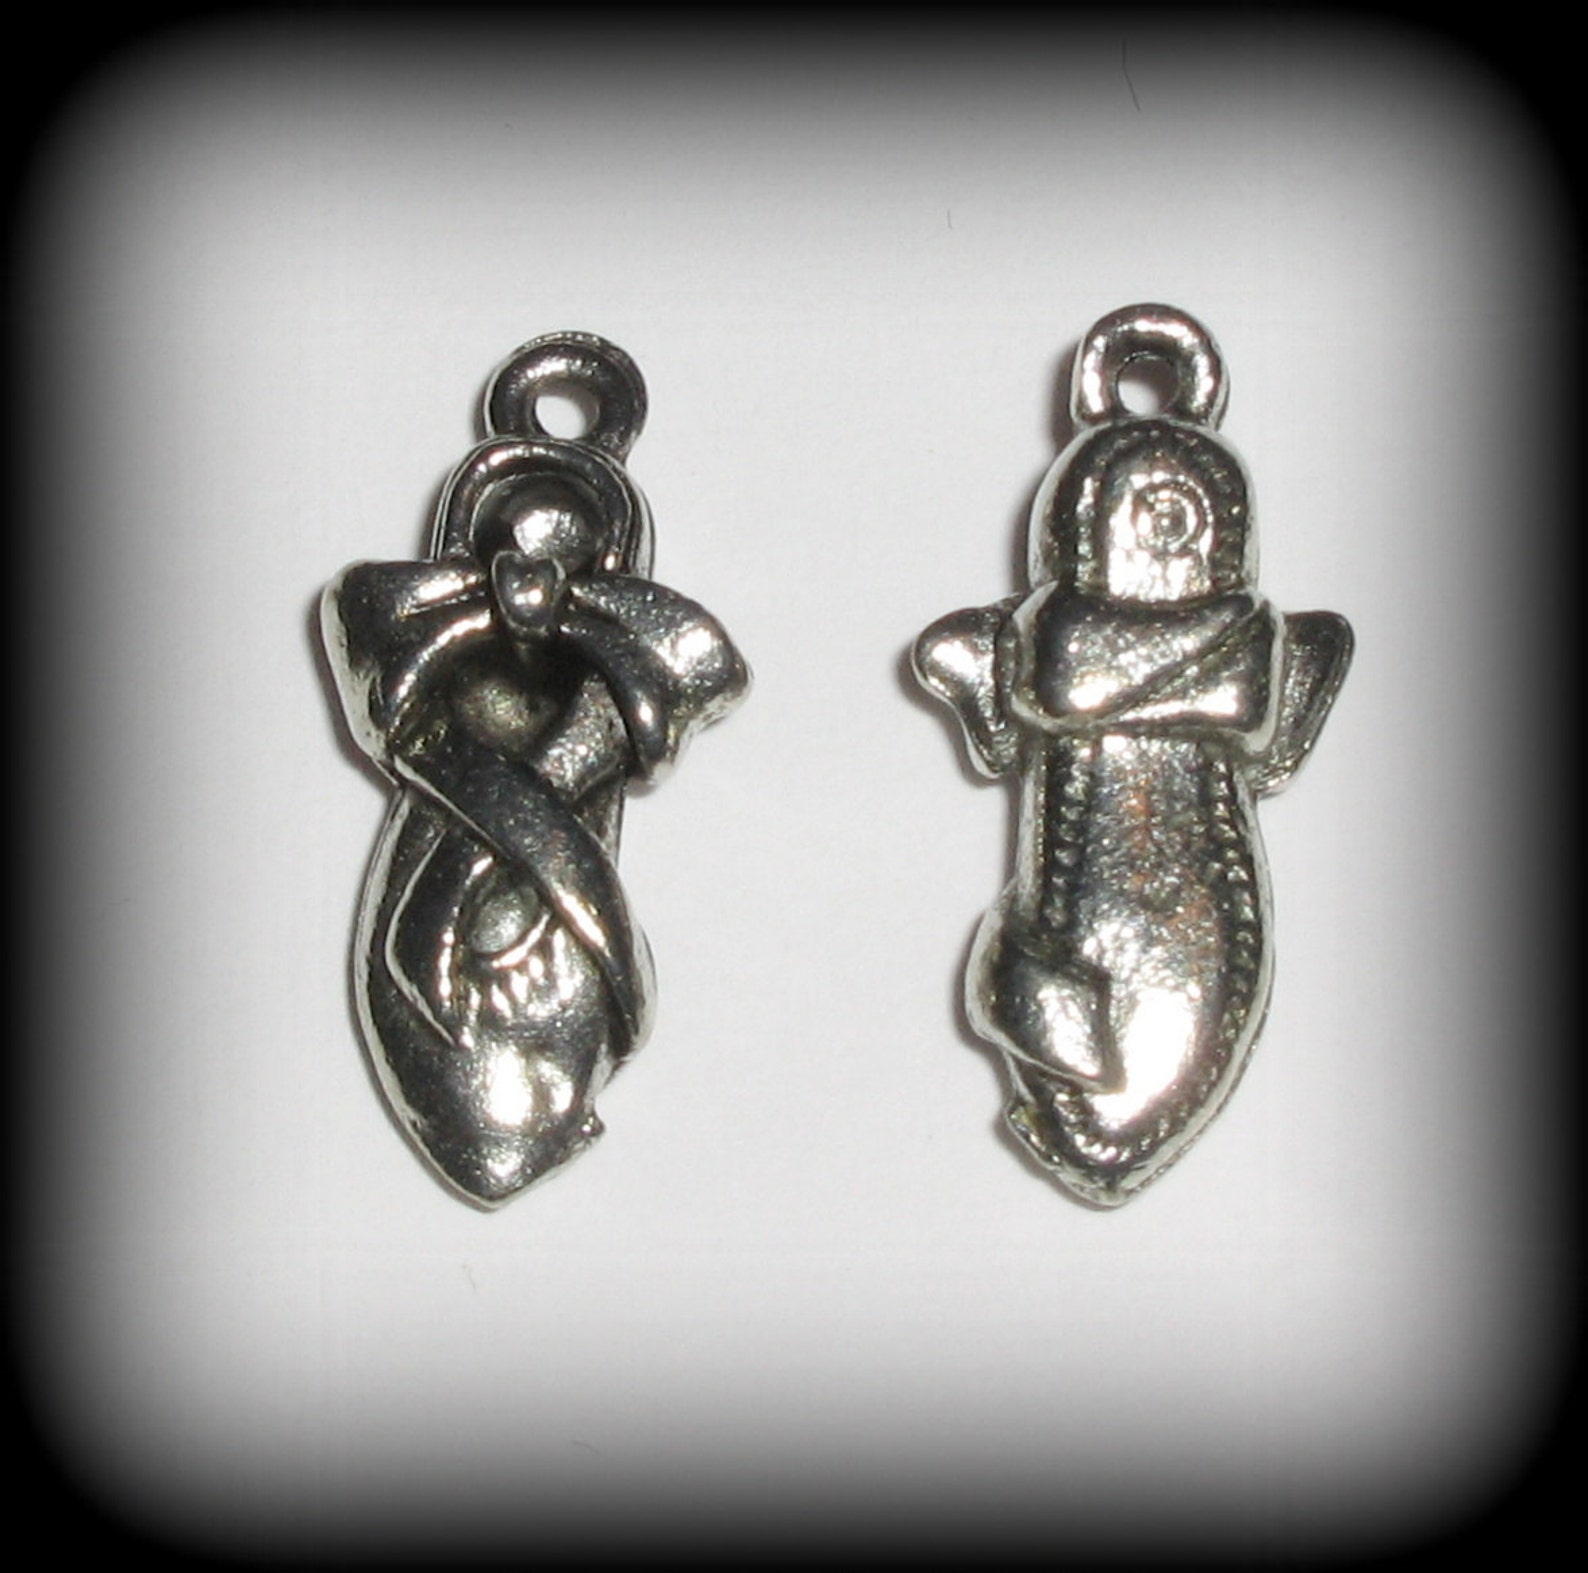 8 silver pewter ballet shoe charms (qb41) - new charm